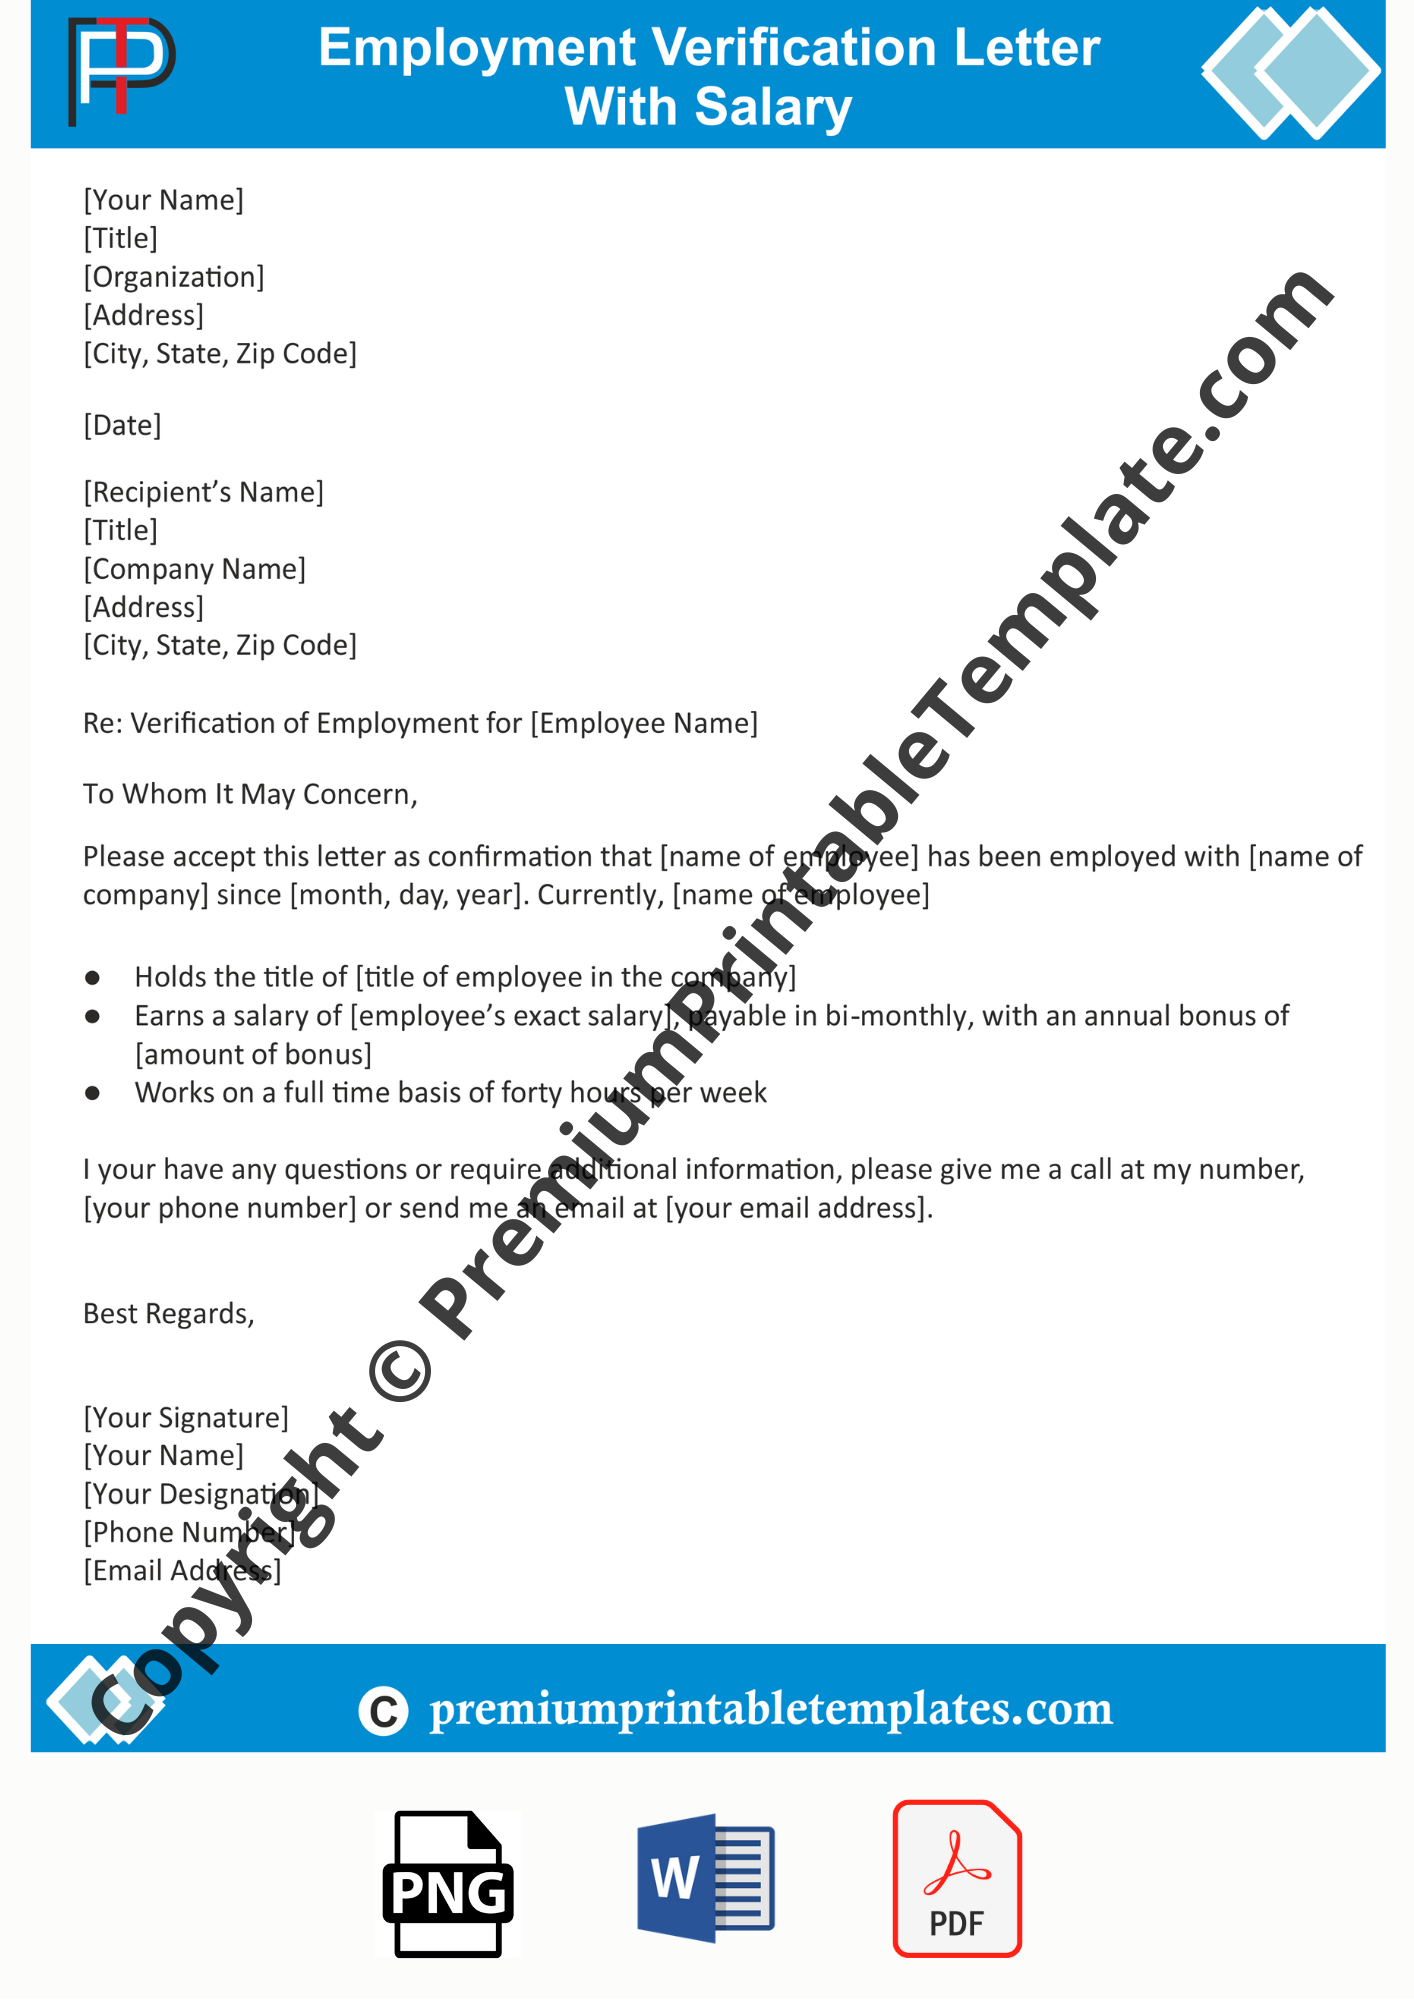 Employment Verification Letter With Salary Premium Printable